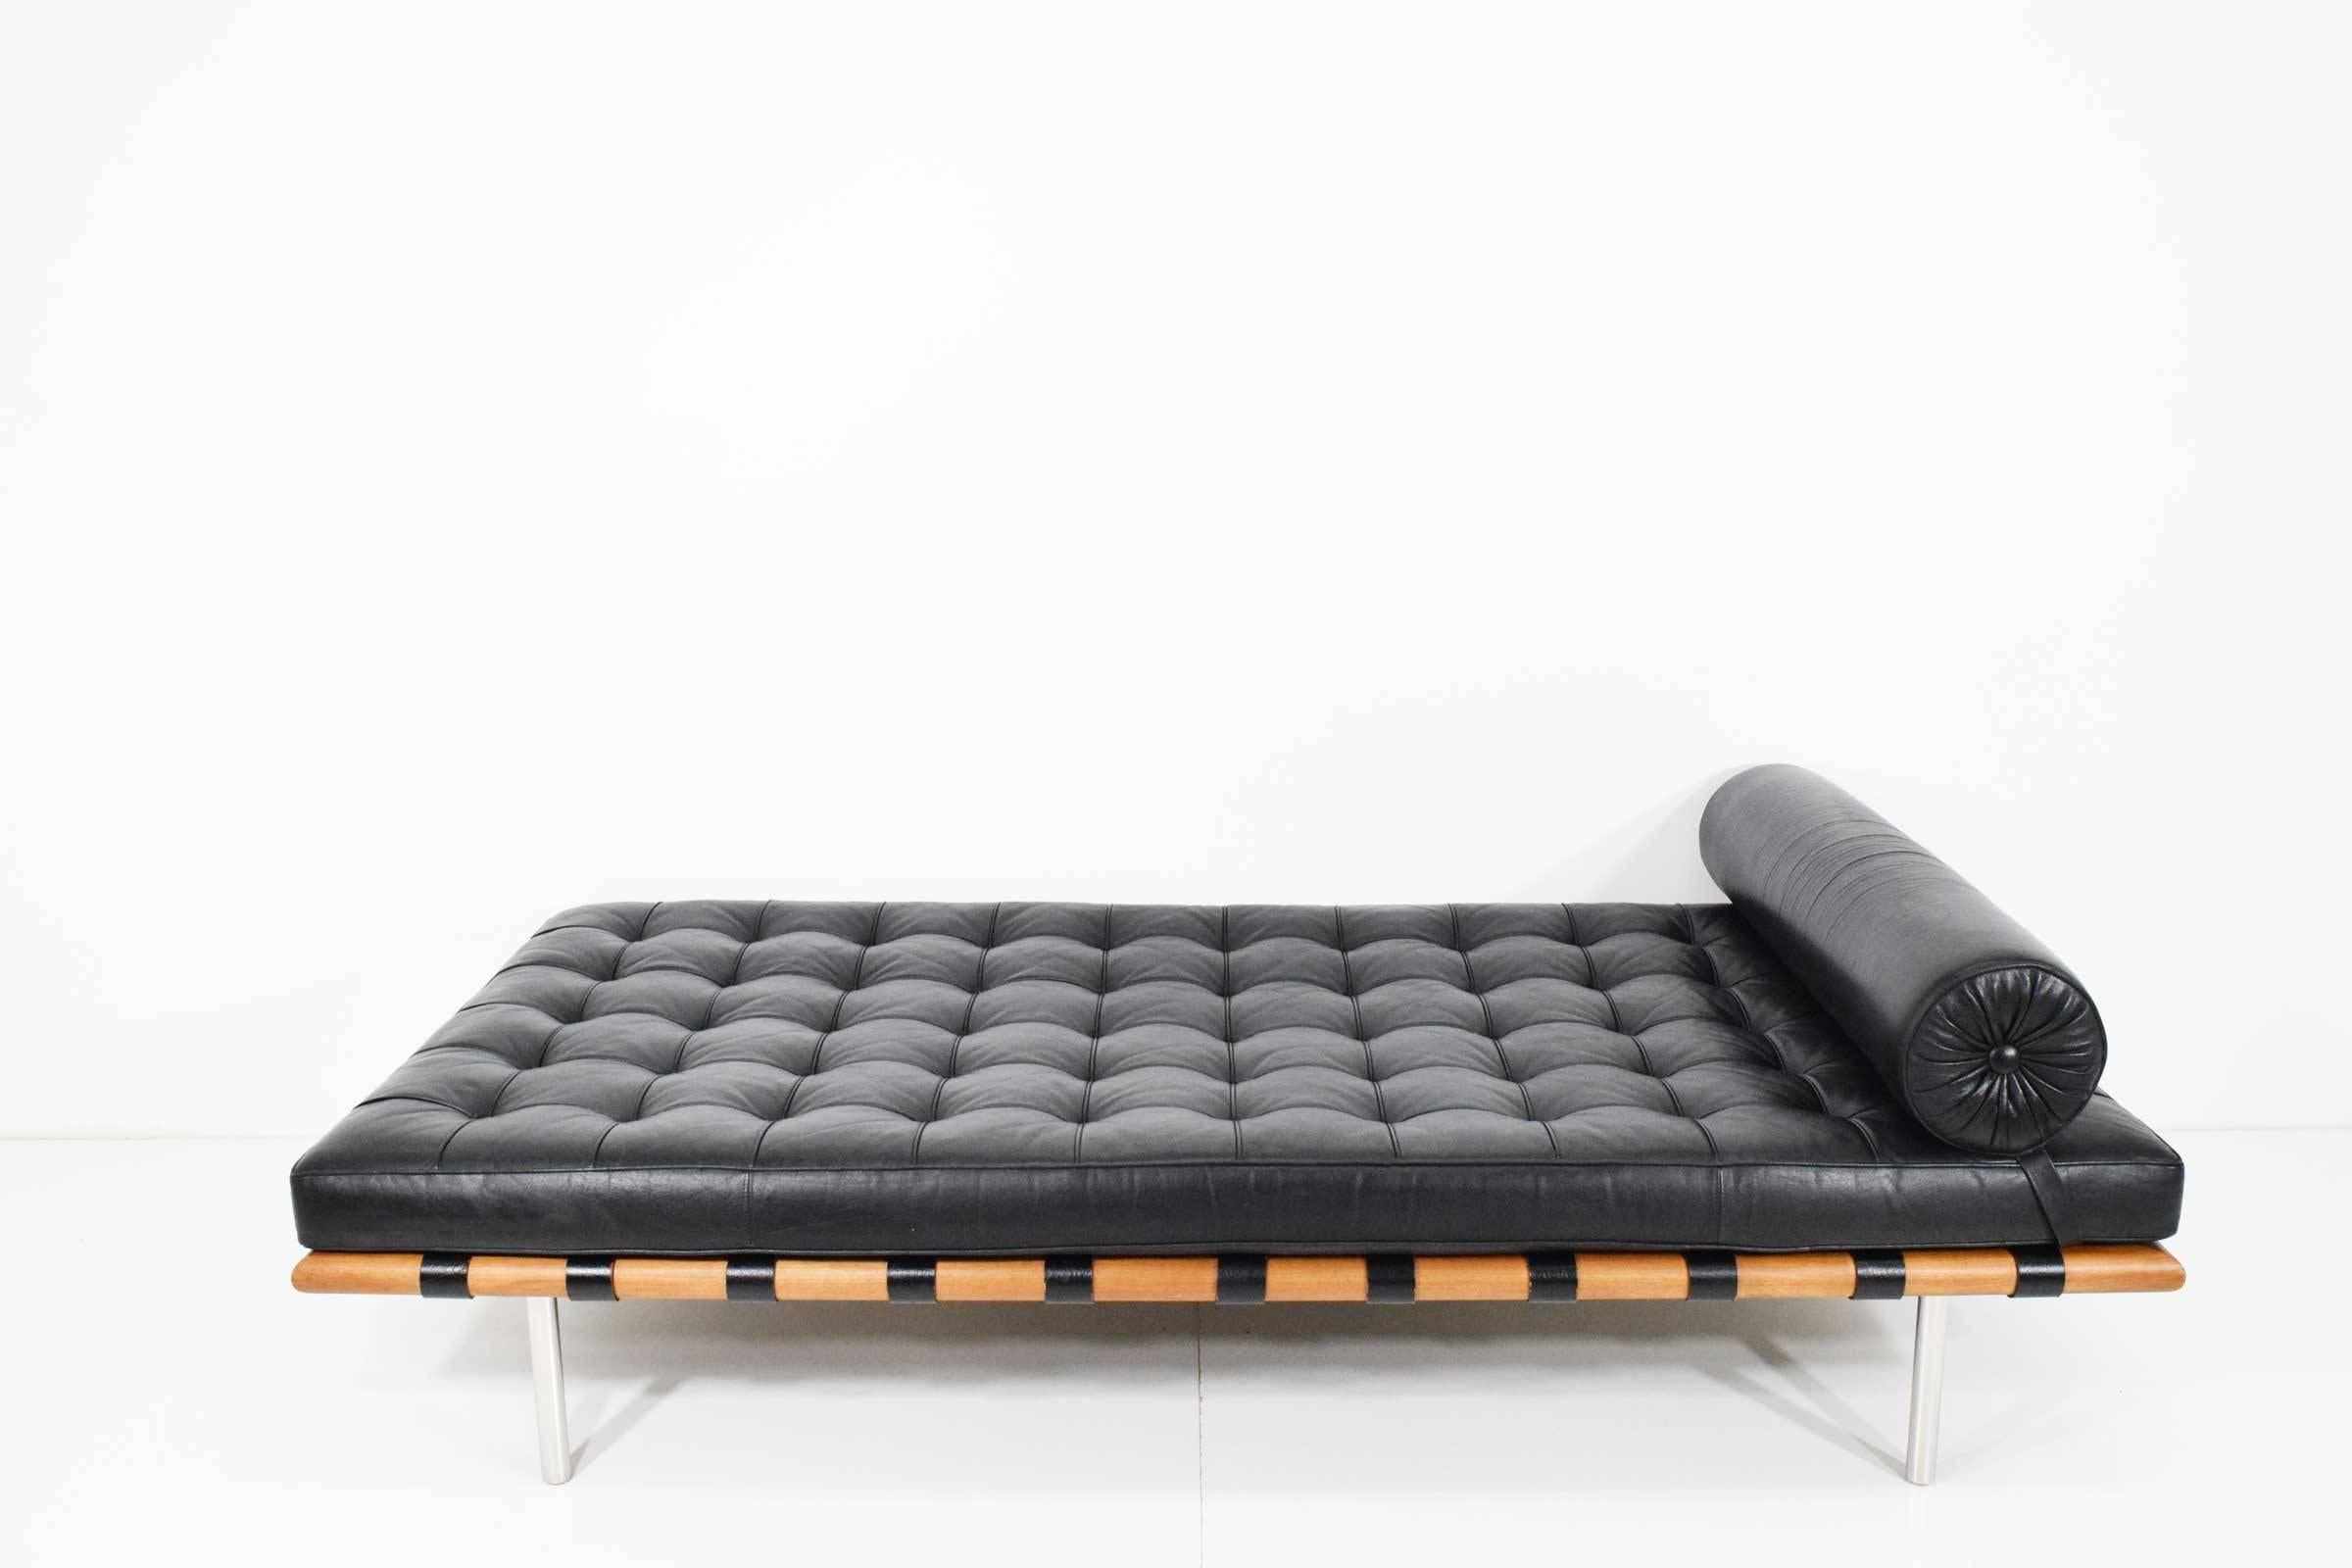 Early Mies van der Rohe Barcelona daybed in black leather. The Barcelona daybed/couch was designed by Mies van der Rohe in 1930. Knoll acquired the rights to the Barcelona collection in 1948. In 1959 art metal acquired Knoll from Florence Knoll. In